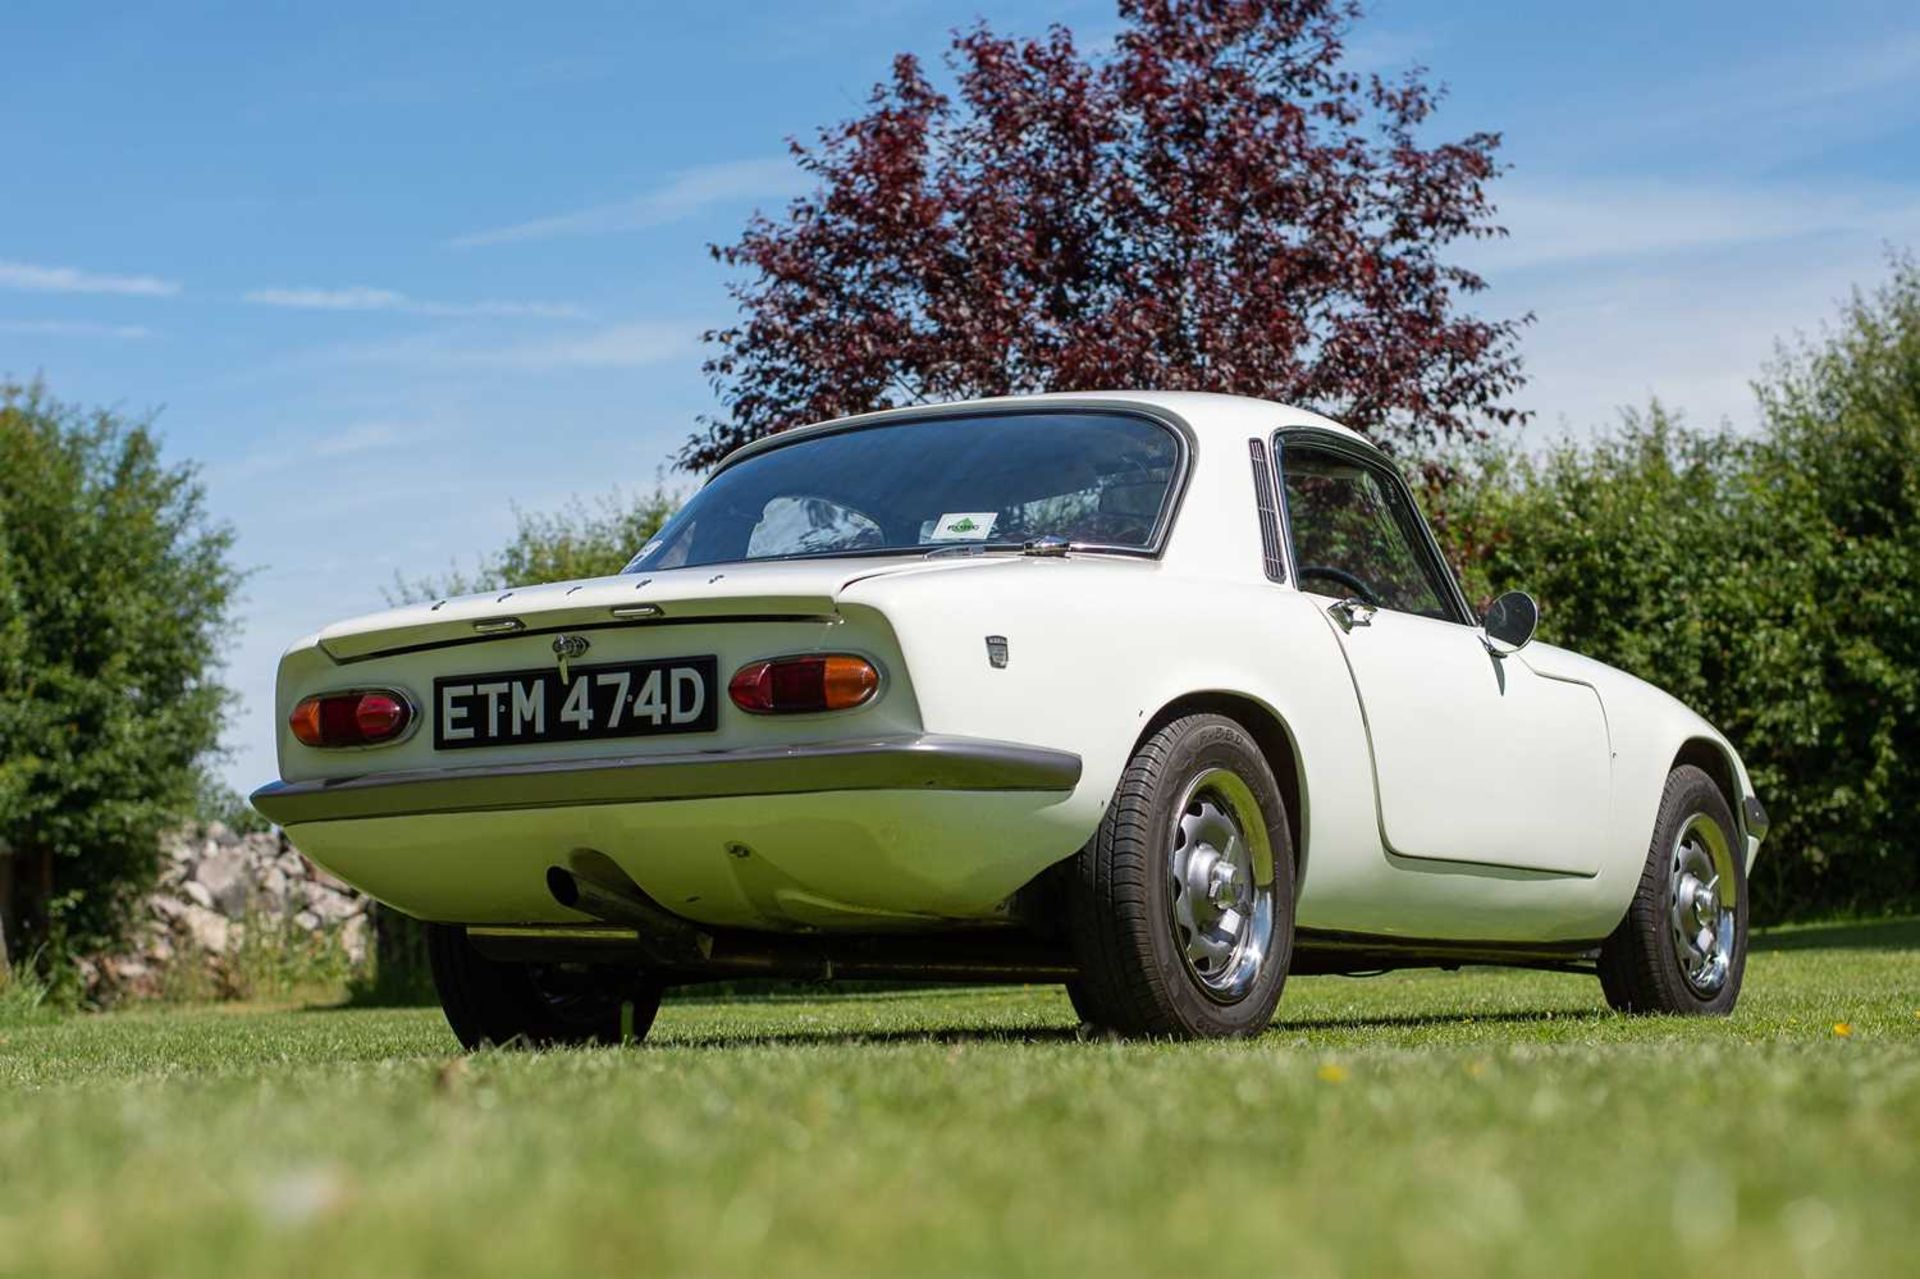 1966 Lotus Elan Fixed Head Coupe Sympathetically restored, equipped with desirable upgrades - Image 15 of 100